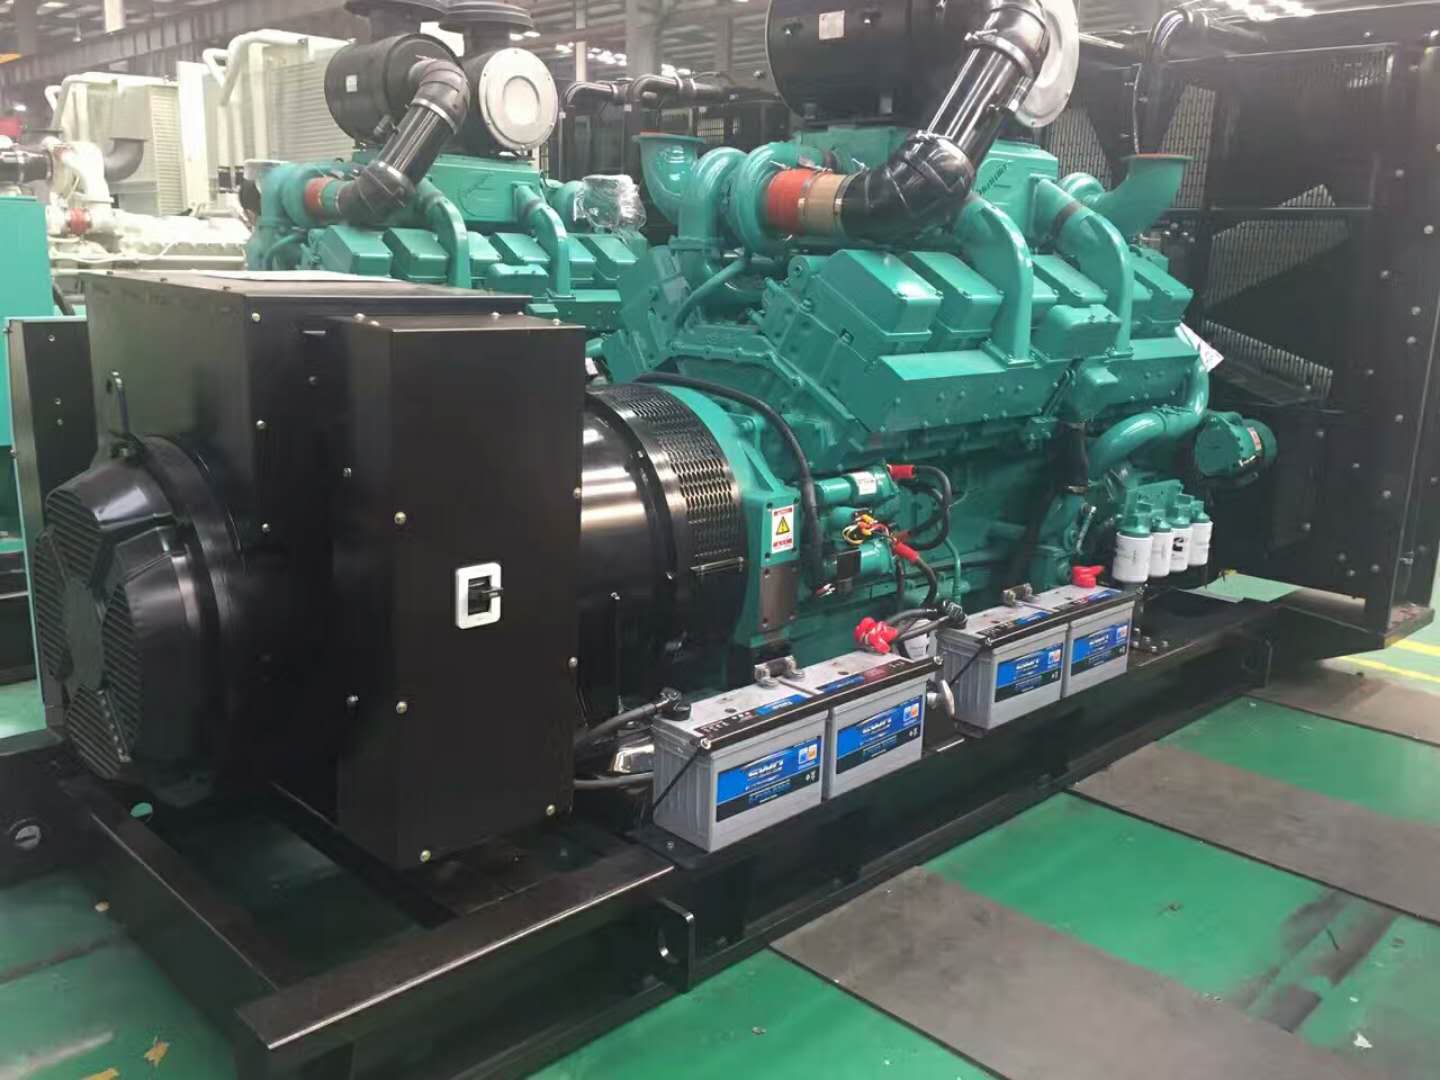 The High Output Alternator: A Perfect Tool For Increasing Oilfield Production